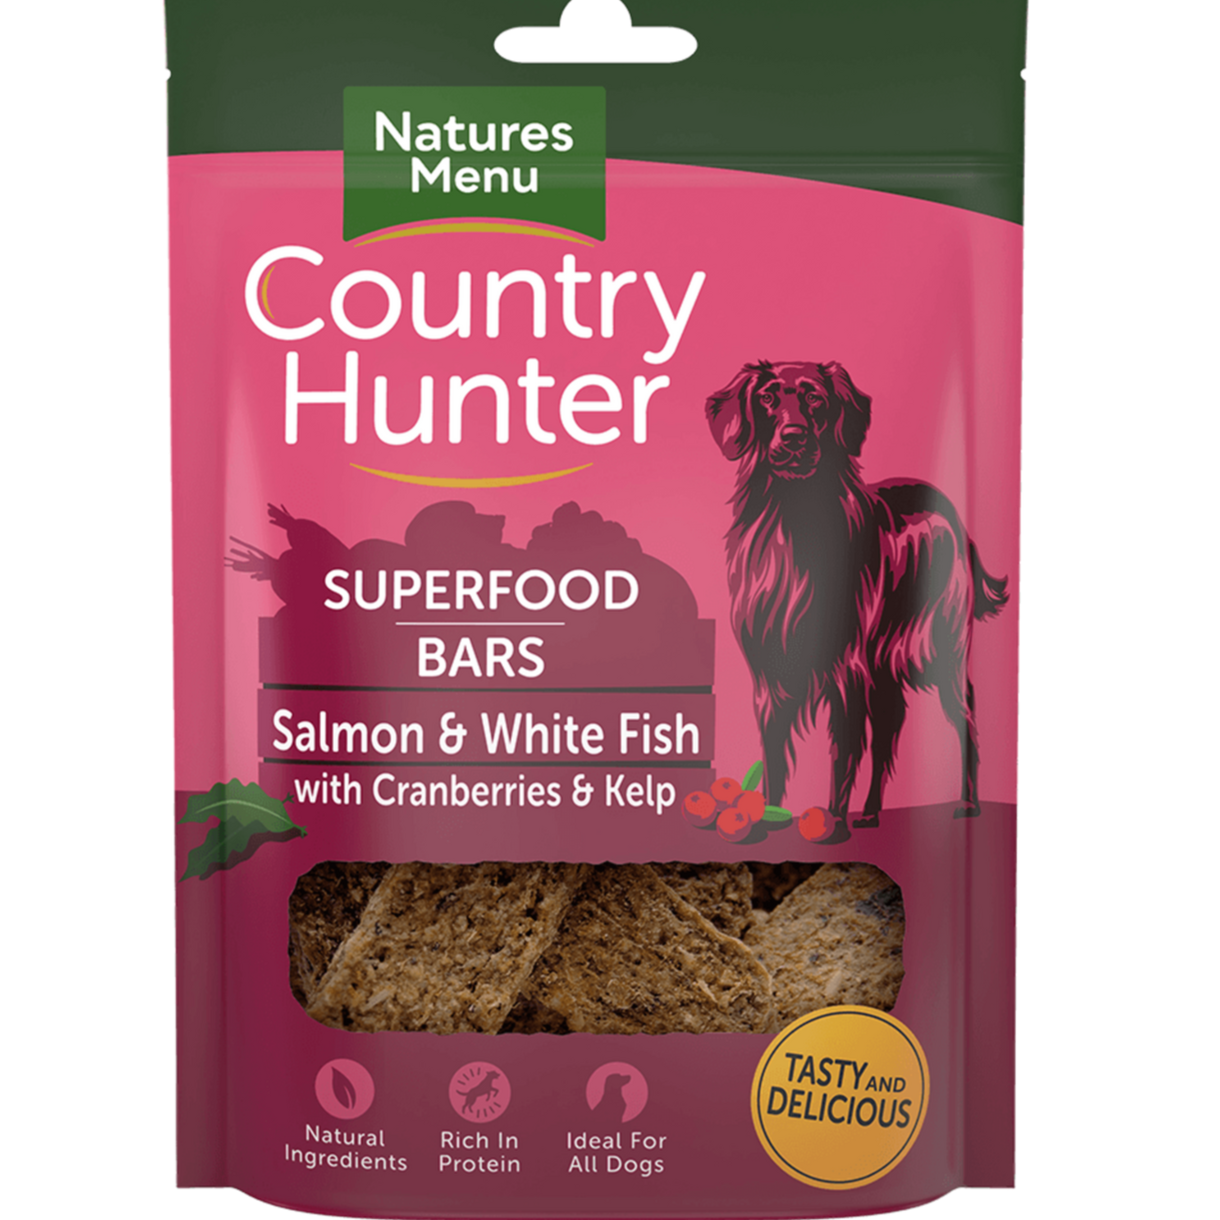 Country Hunter 7x100g Superfood Bar Salmon & White Fish with Cranberries & Kelp